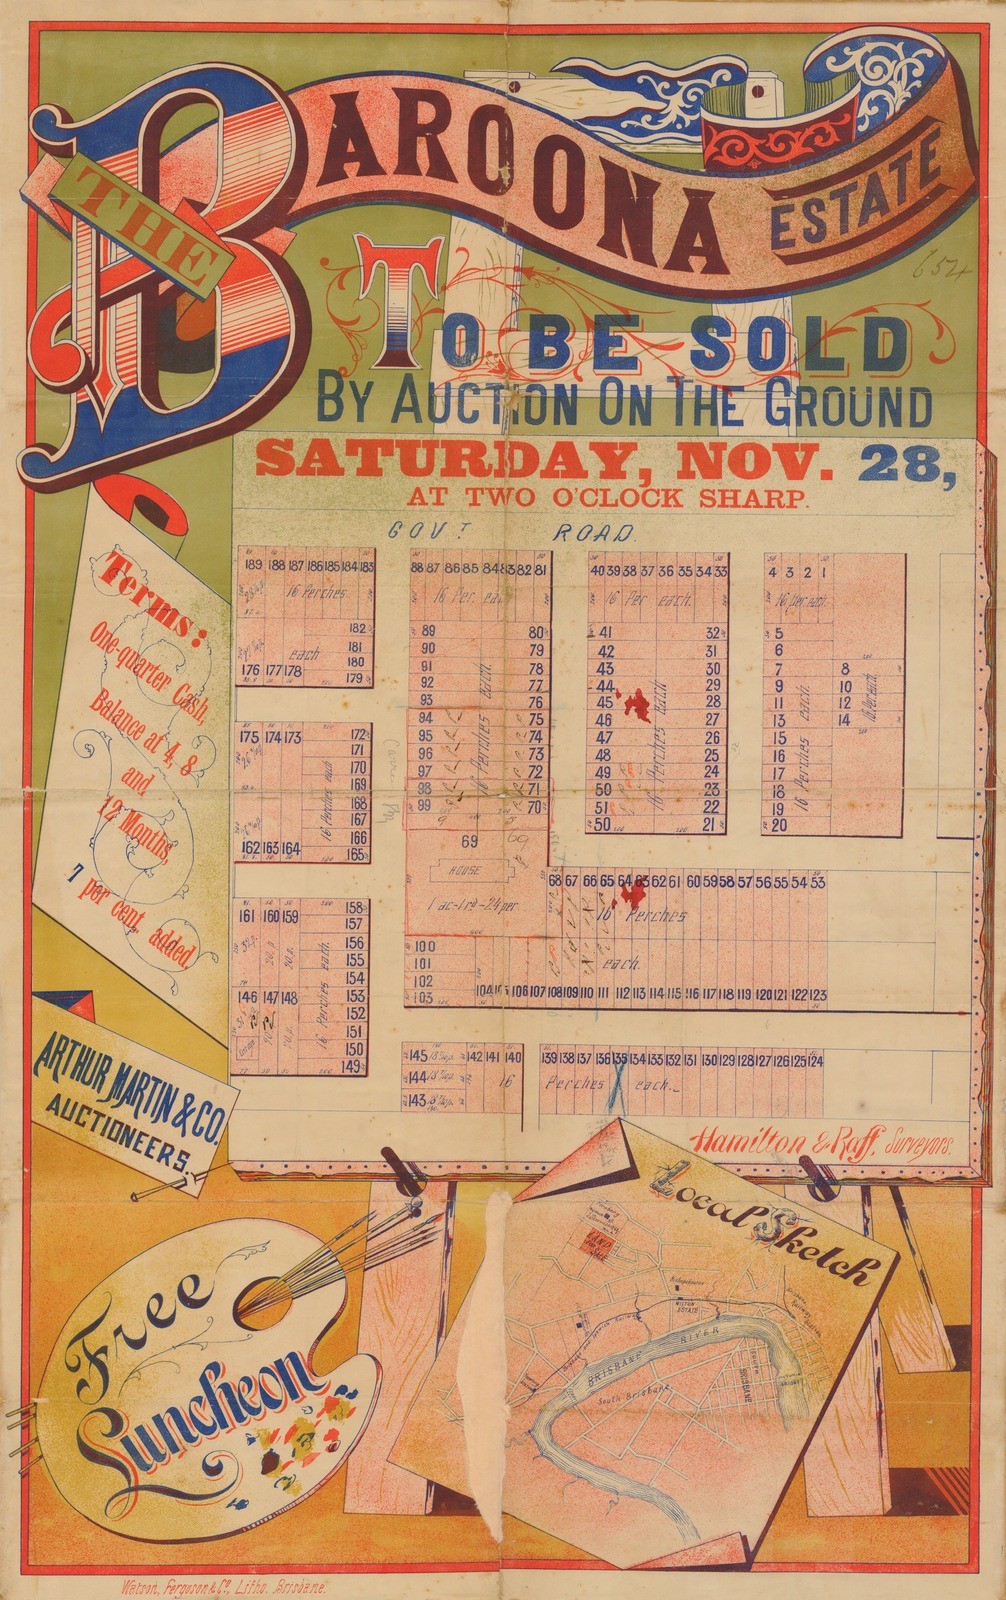 The Baroona Estate to be sold by auction on the ground Saturday Nov 28 at two oclock sharp1885